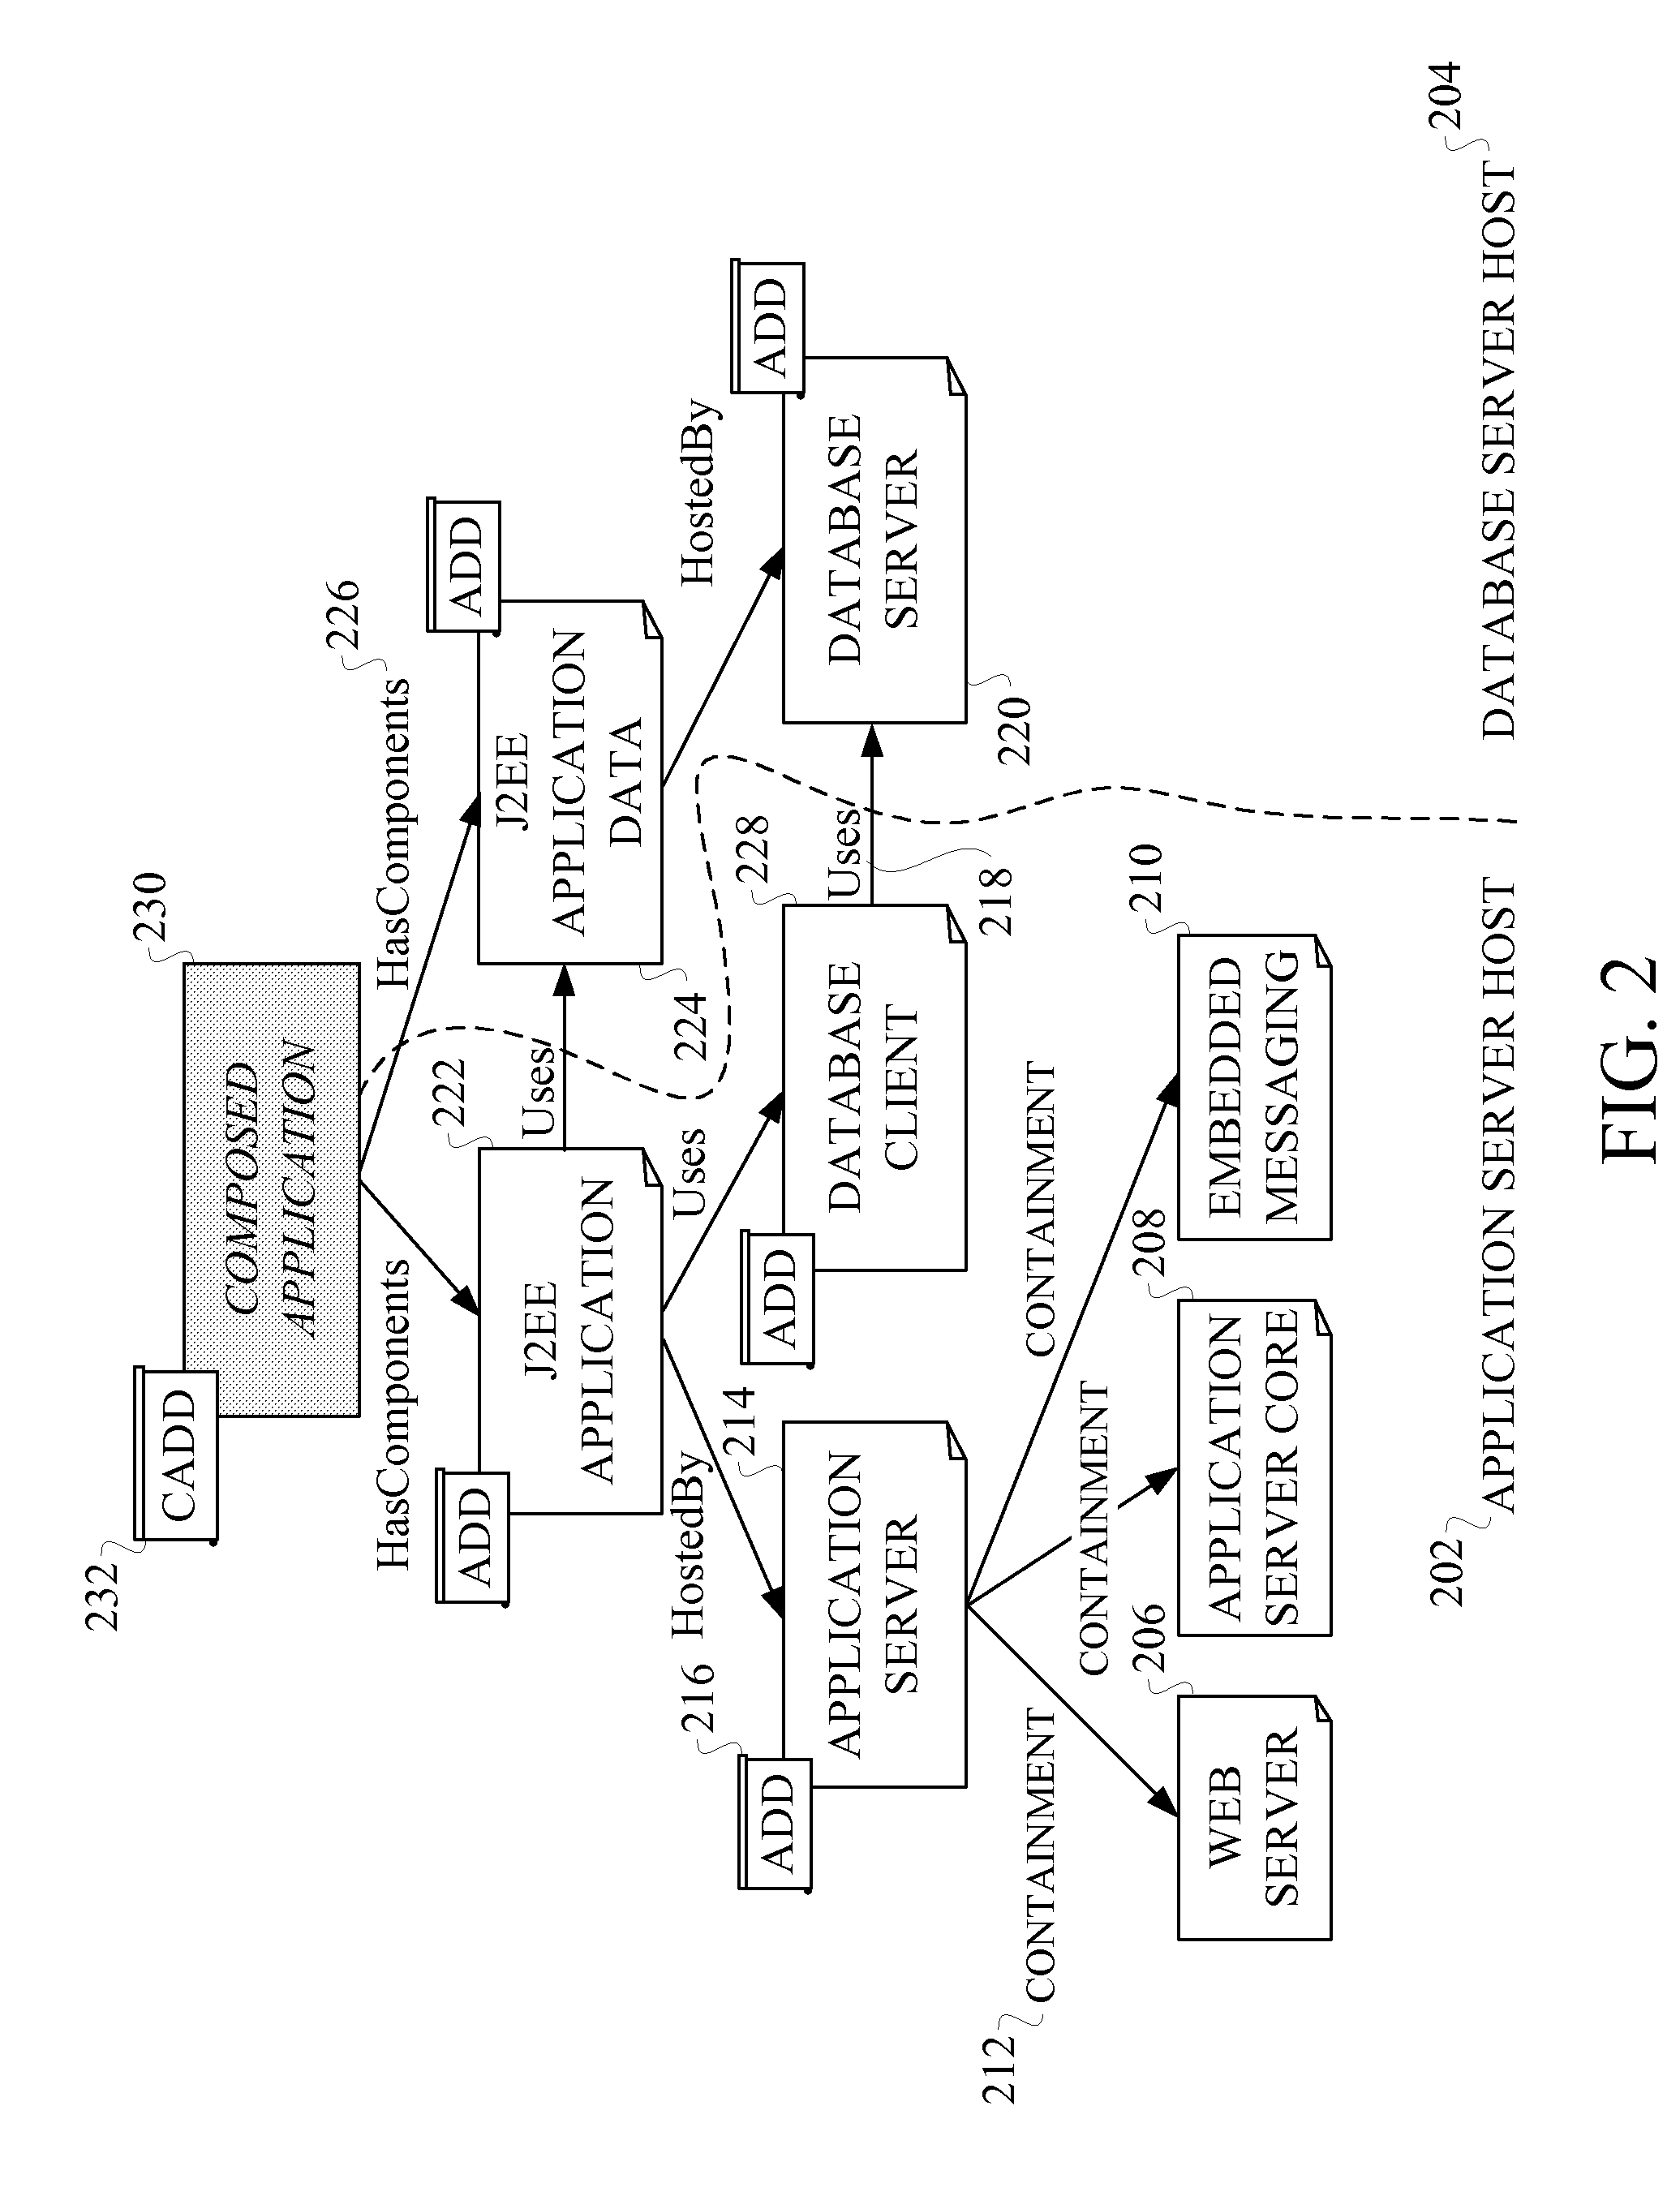 Systems and methods for constructing relationship specifications from component interactions